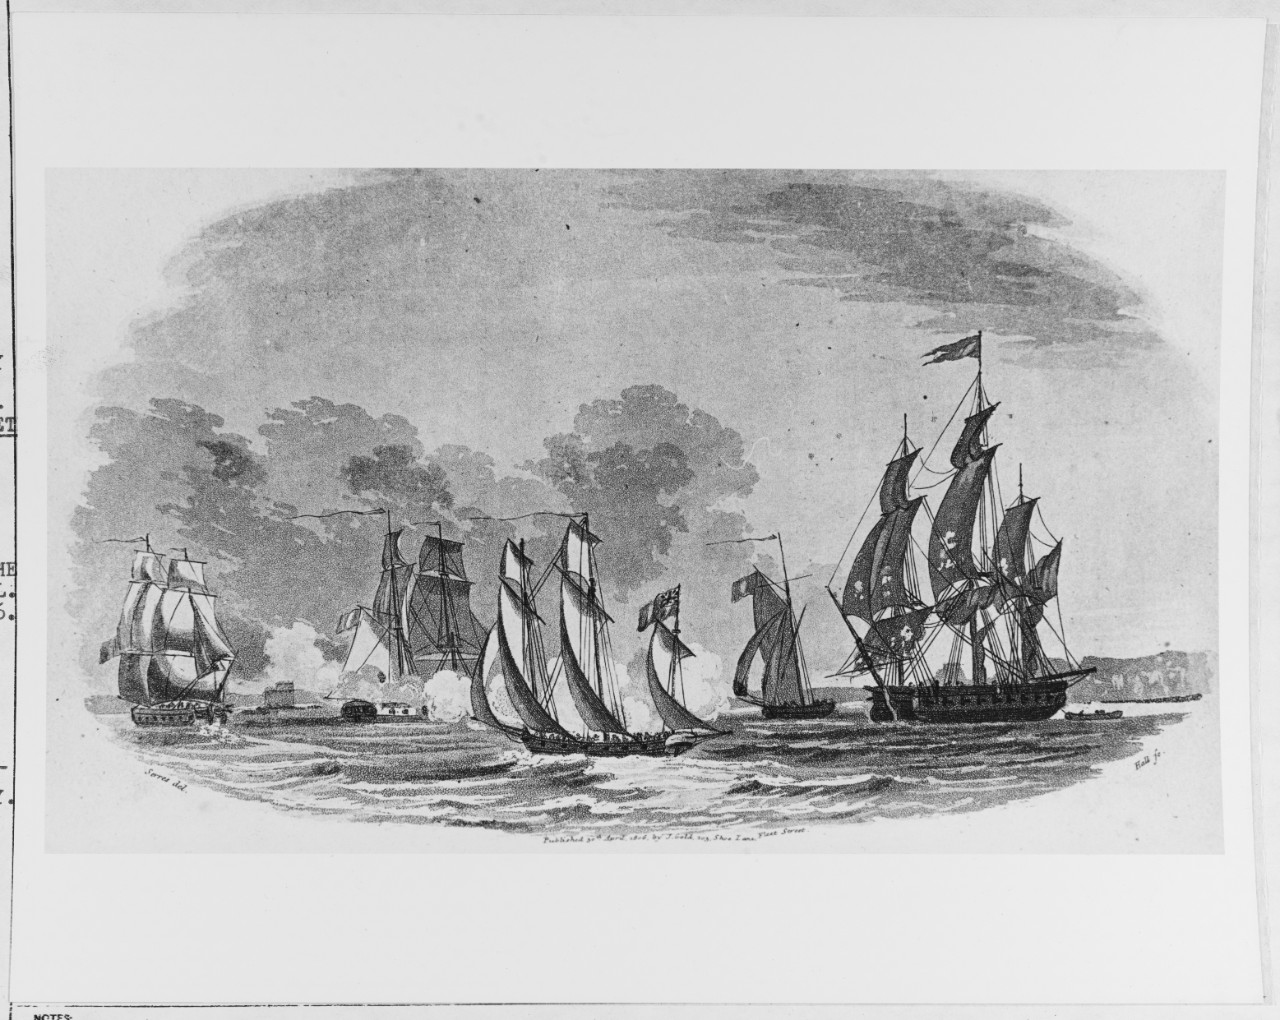 "The Aristocrat Armed Lugger, Engaging a French Flotilla, consisting of nine sail."